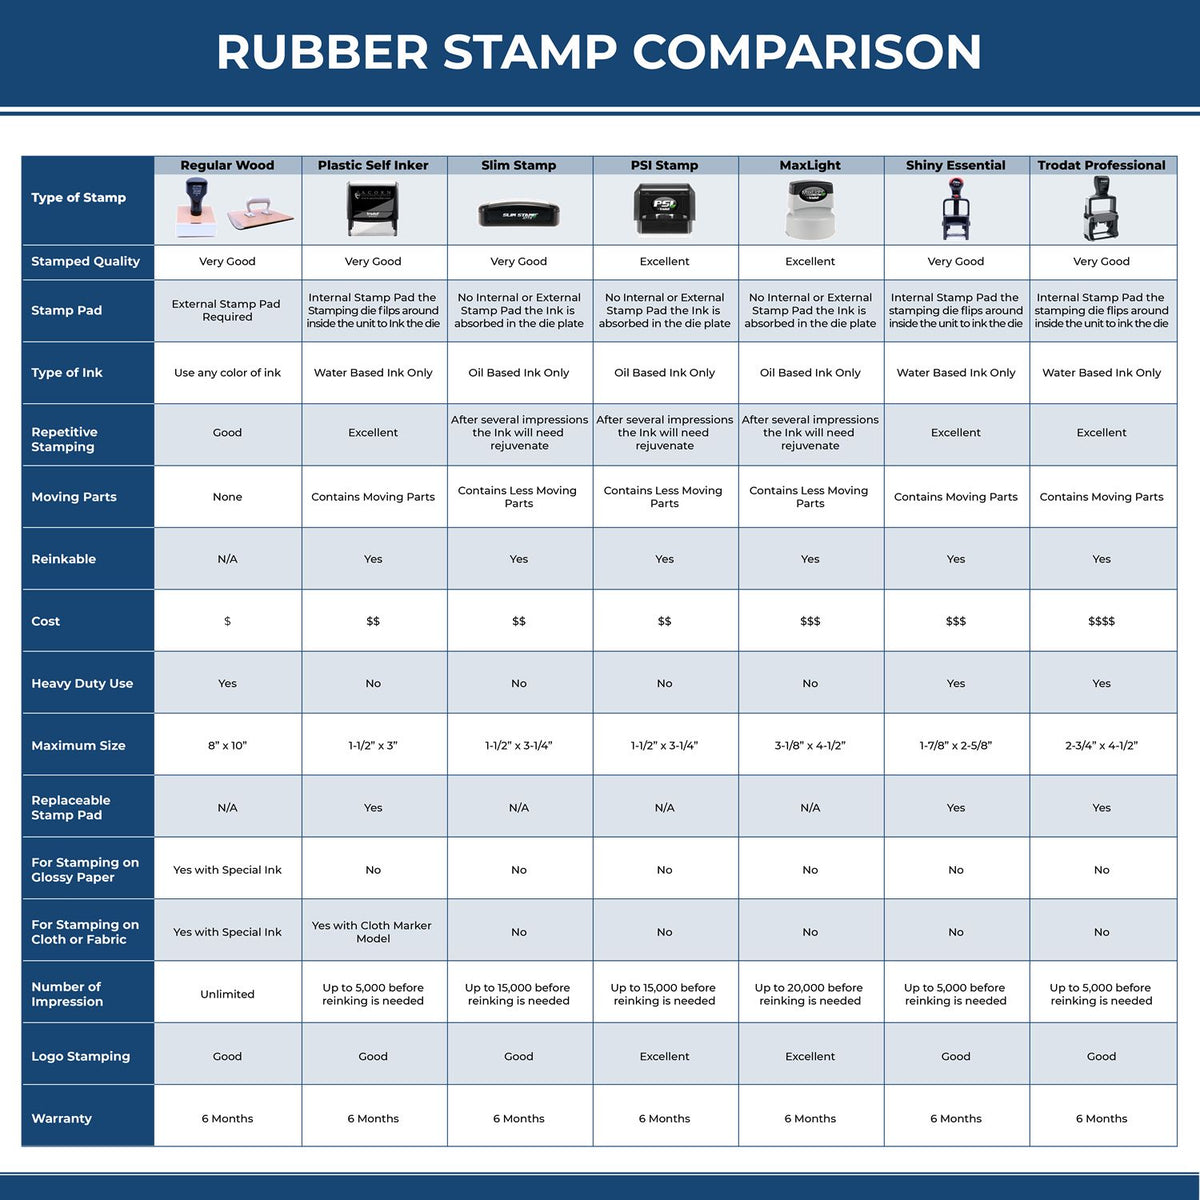 A comparison chart for the different types of mount models available for the Self-Inking South Carolina PE Stamp.